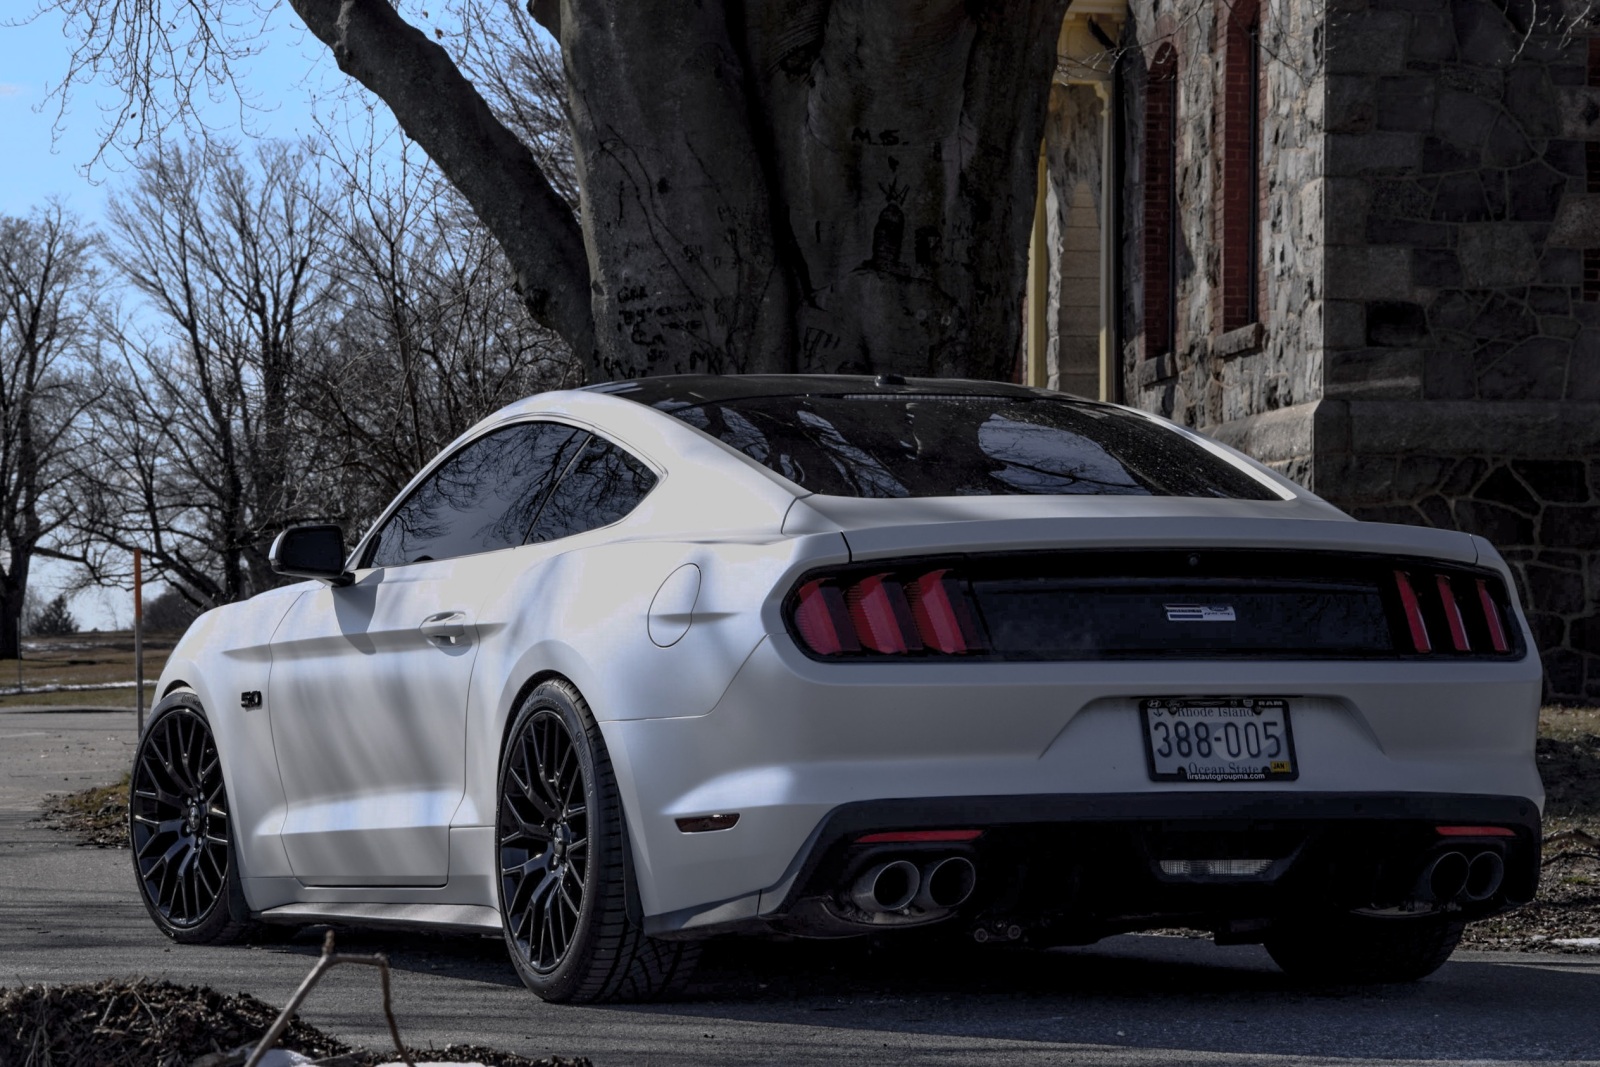 Satin Pearl White Full Wrap!!! | 2015+ S550 Mustang Forum (GT, EcoBoost